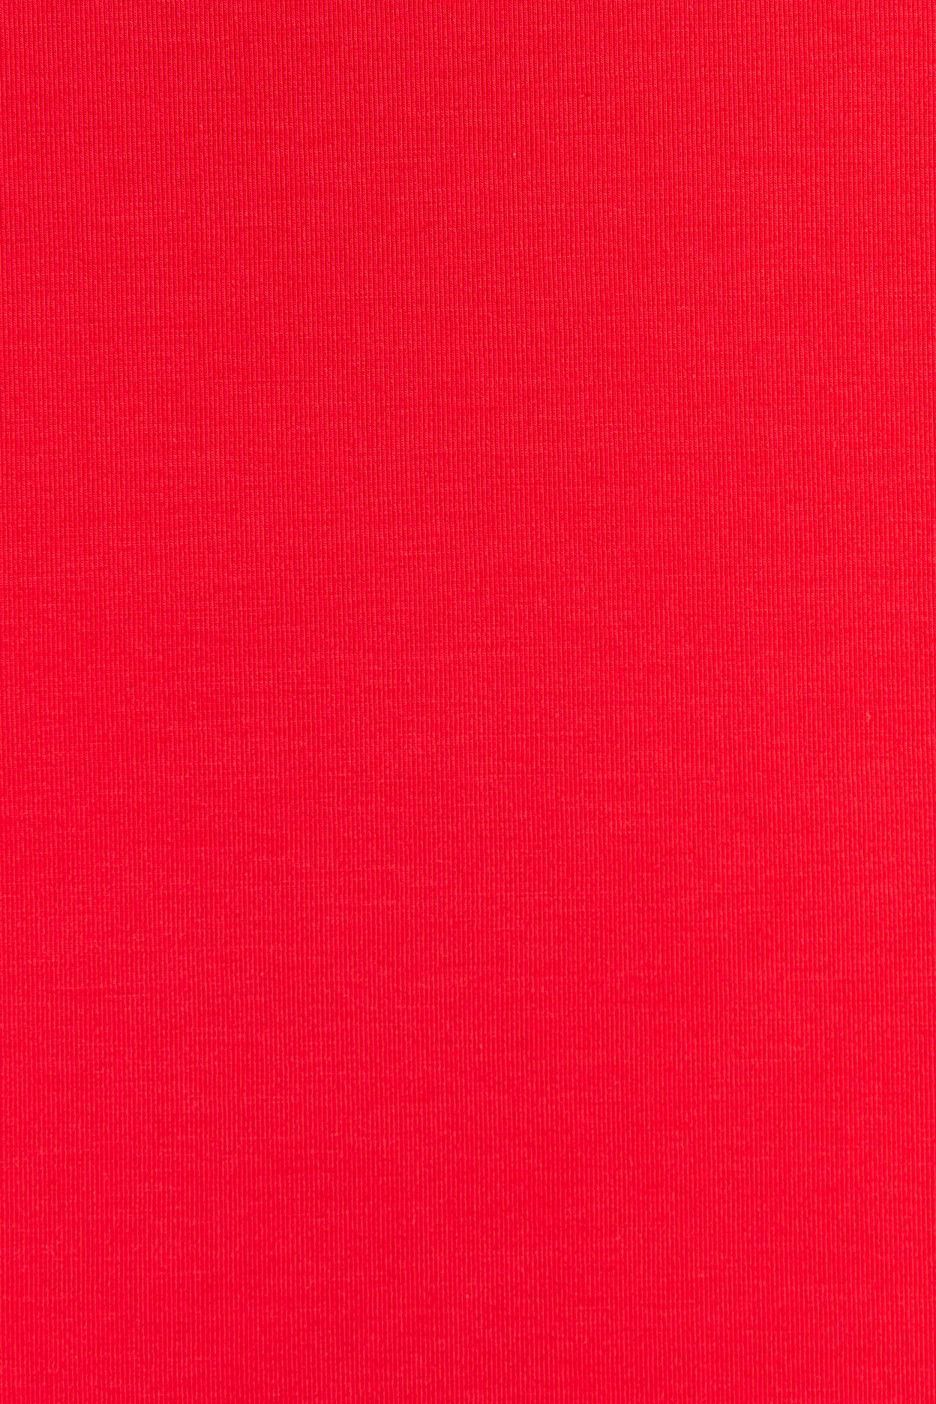 Solid Red Wallpapers on WallpaperDog